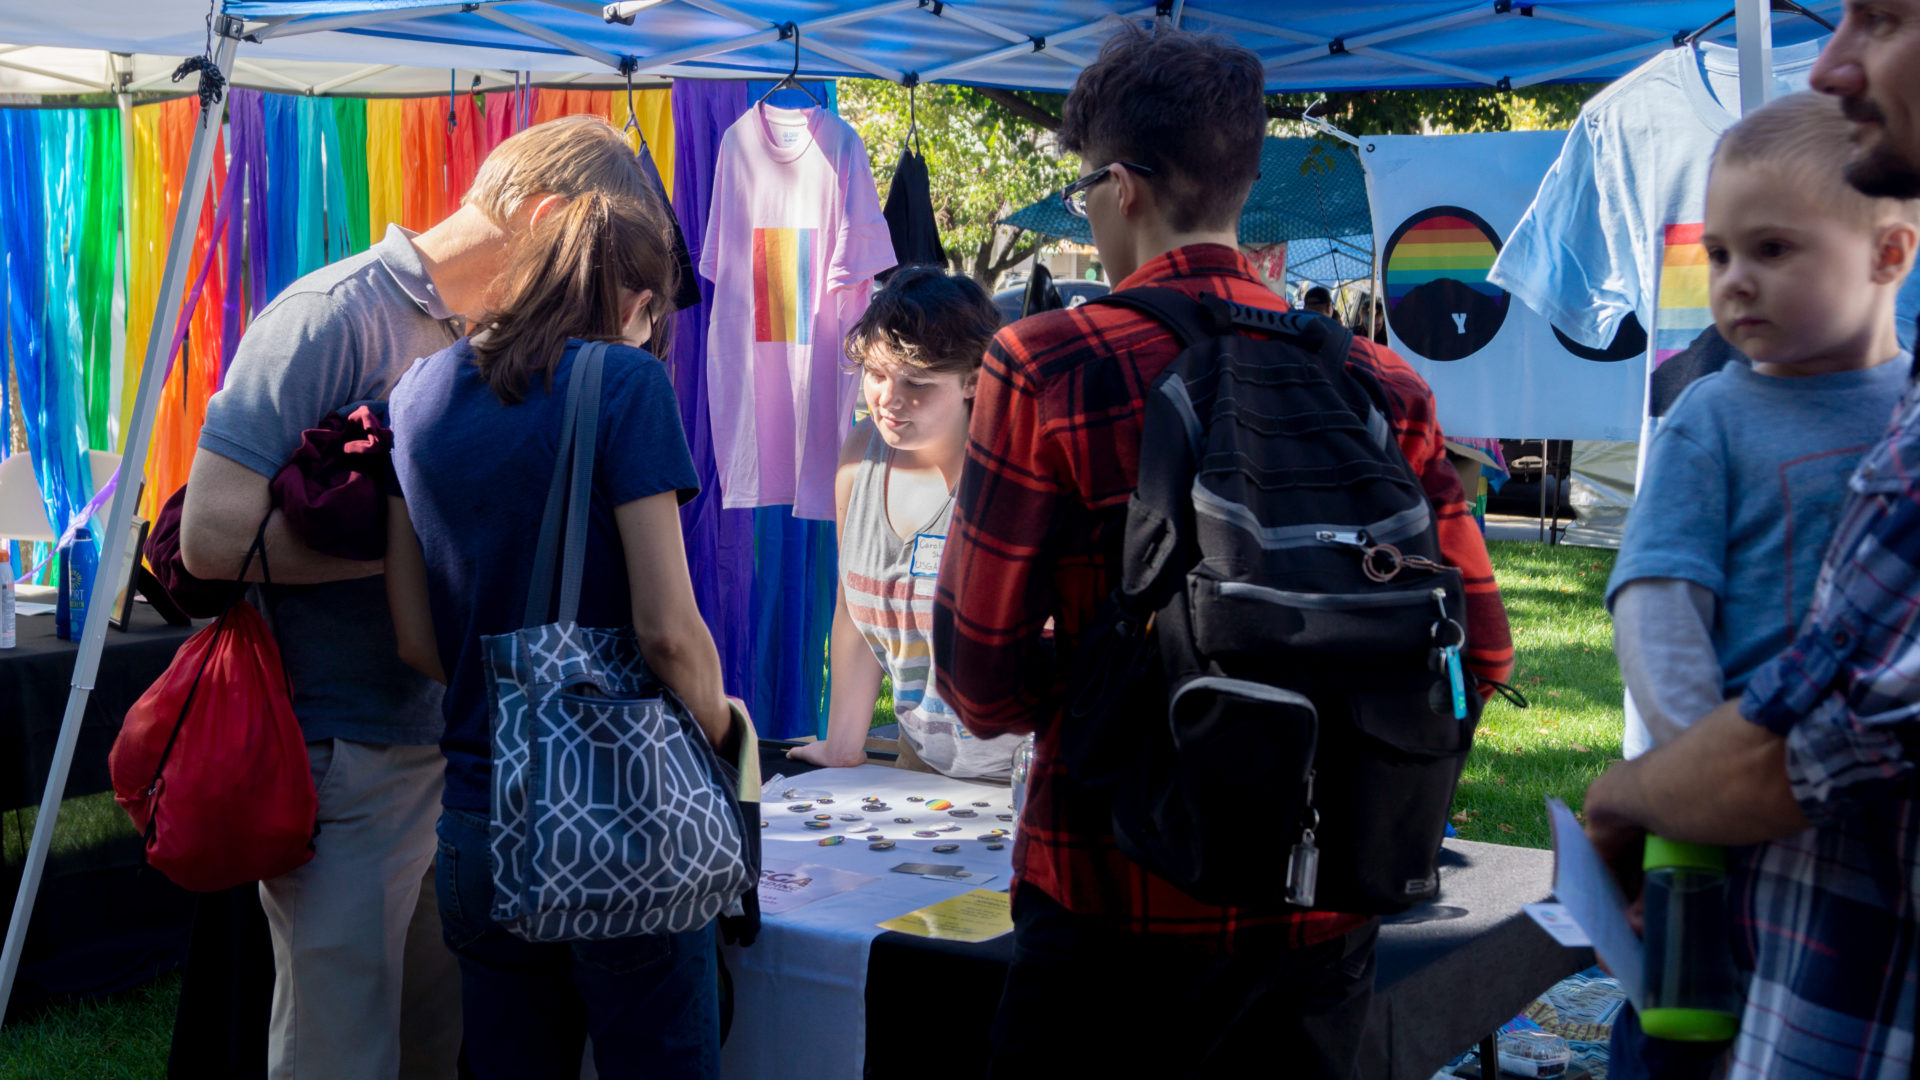 Provo Pride Festival offers a safe place for LGBTQ students and